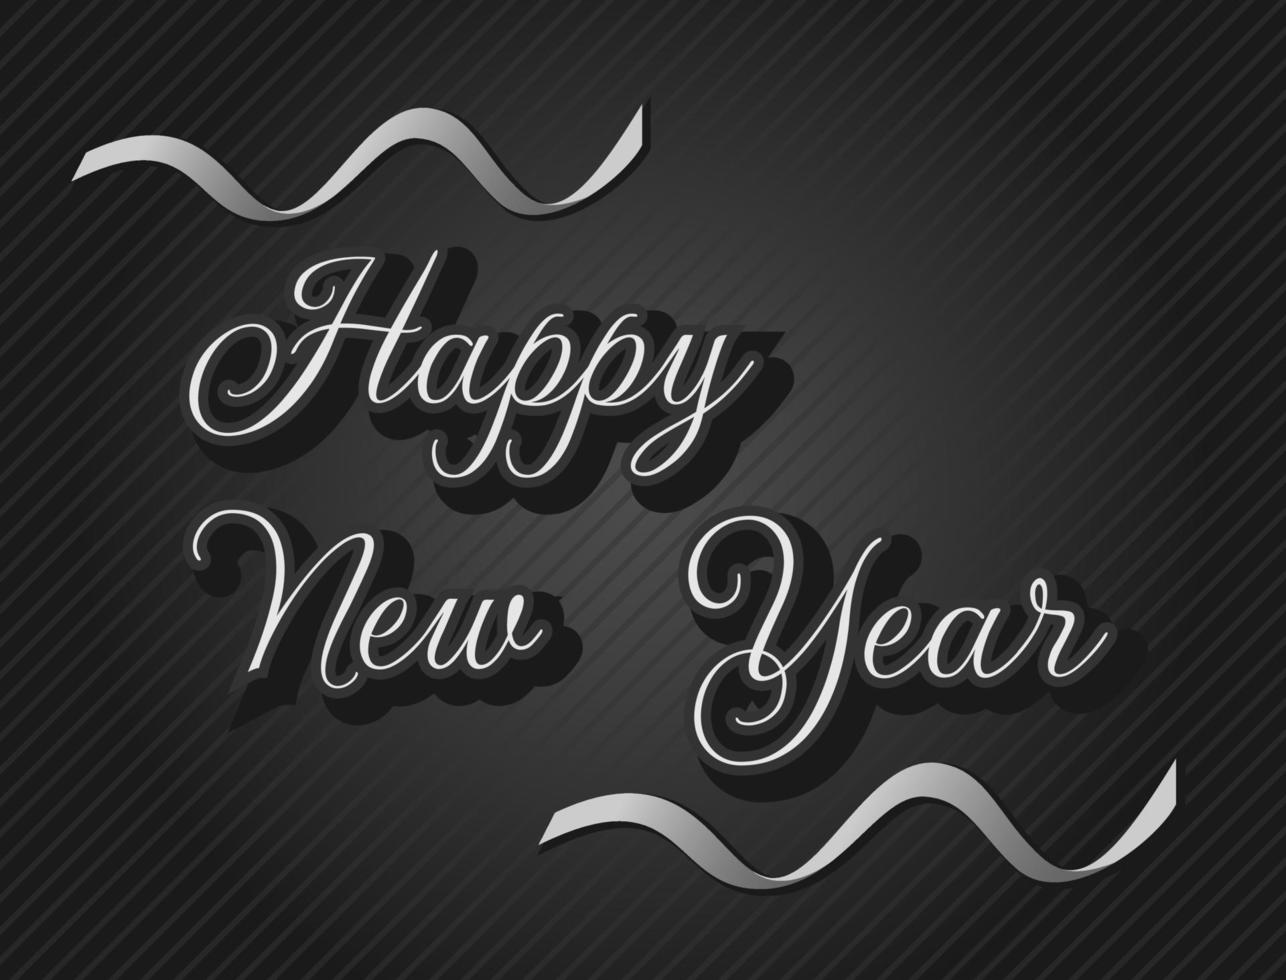 Happy New Years on black background vector